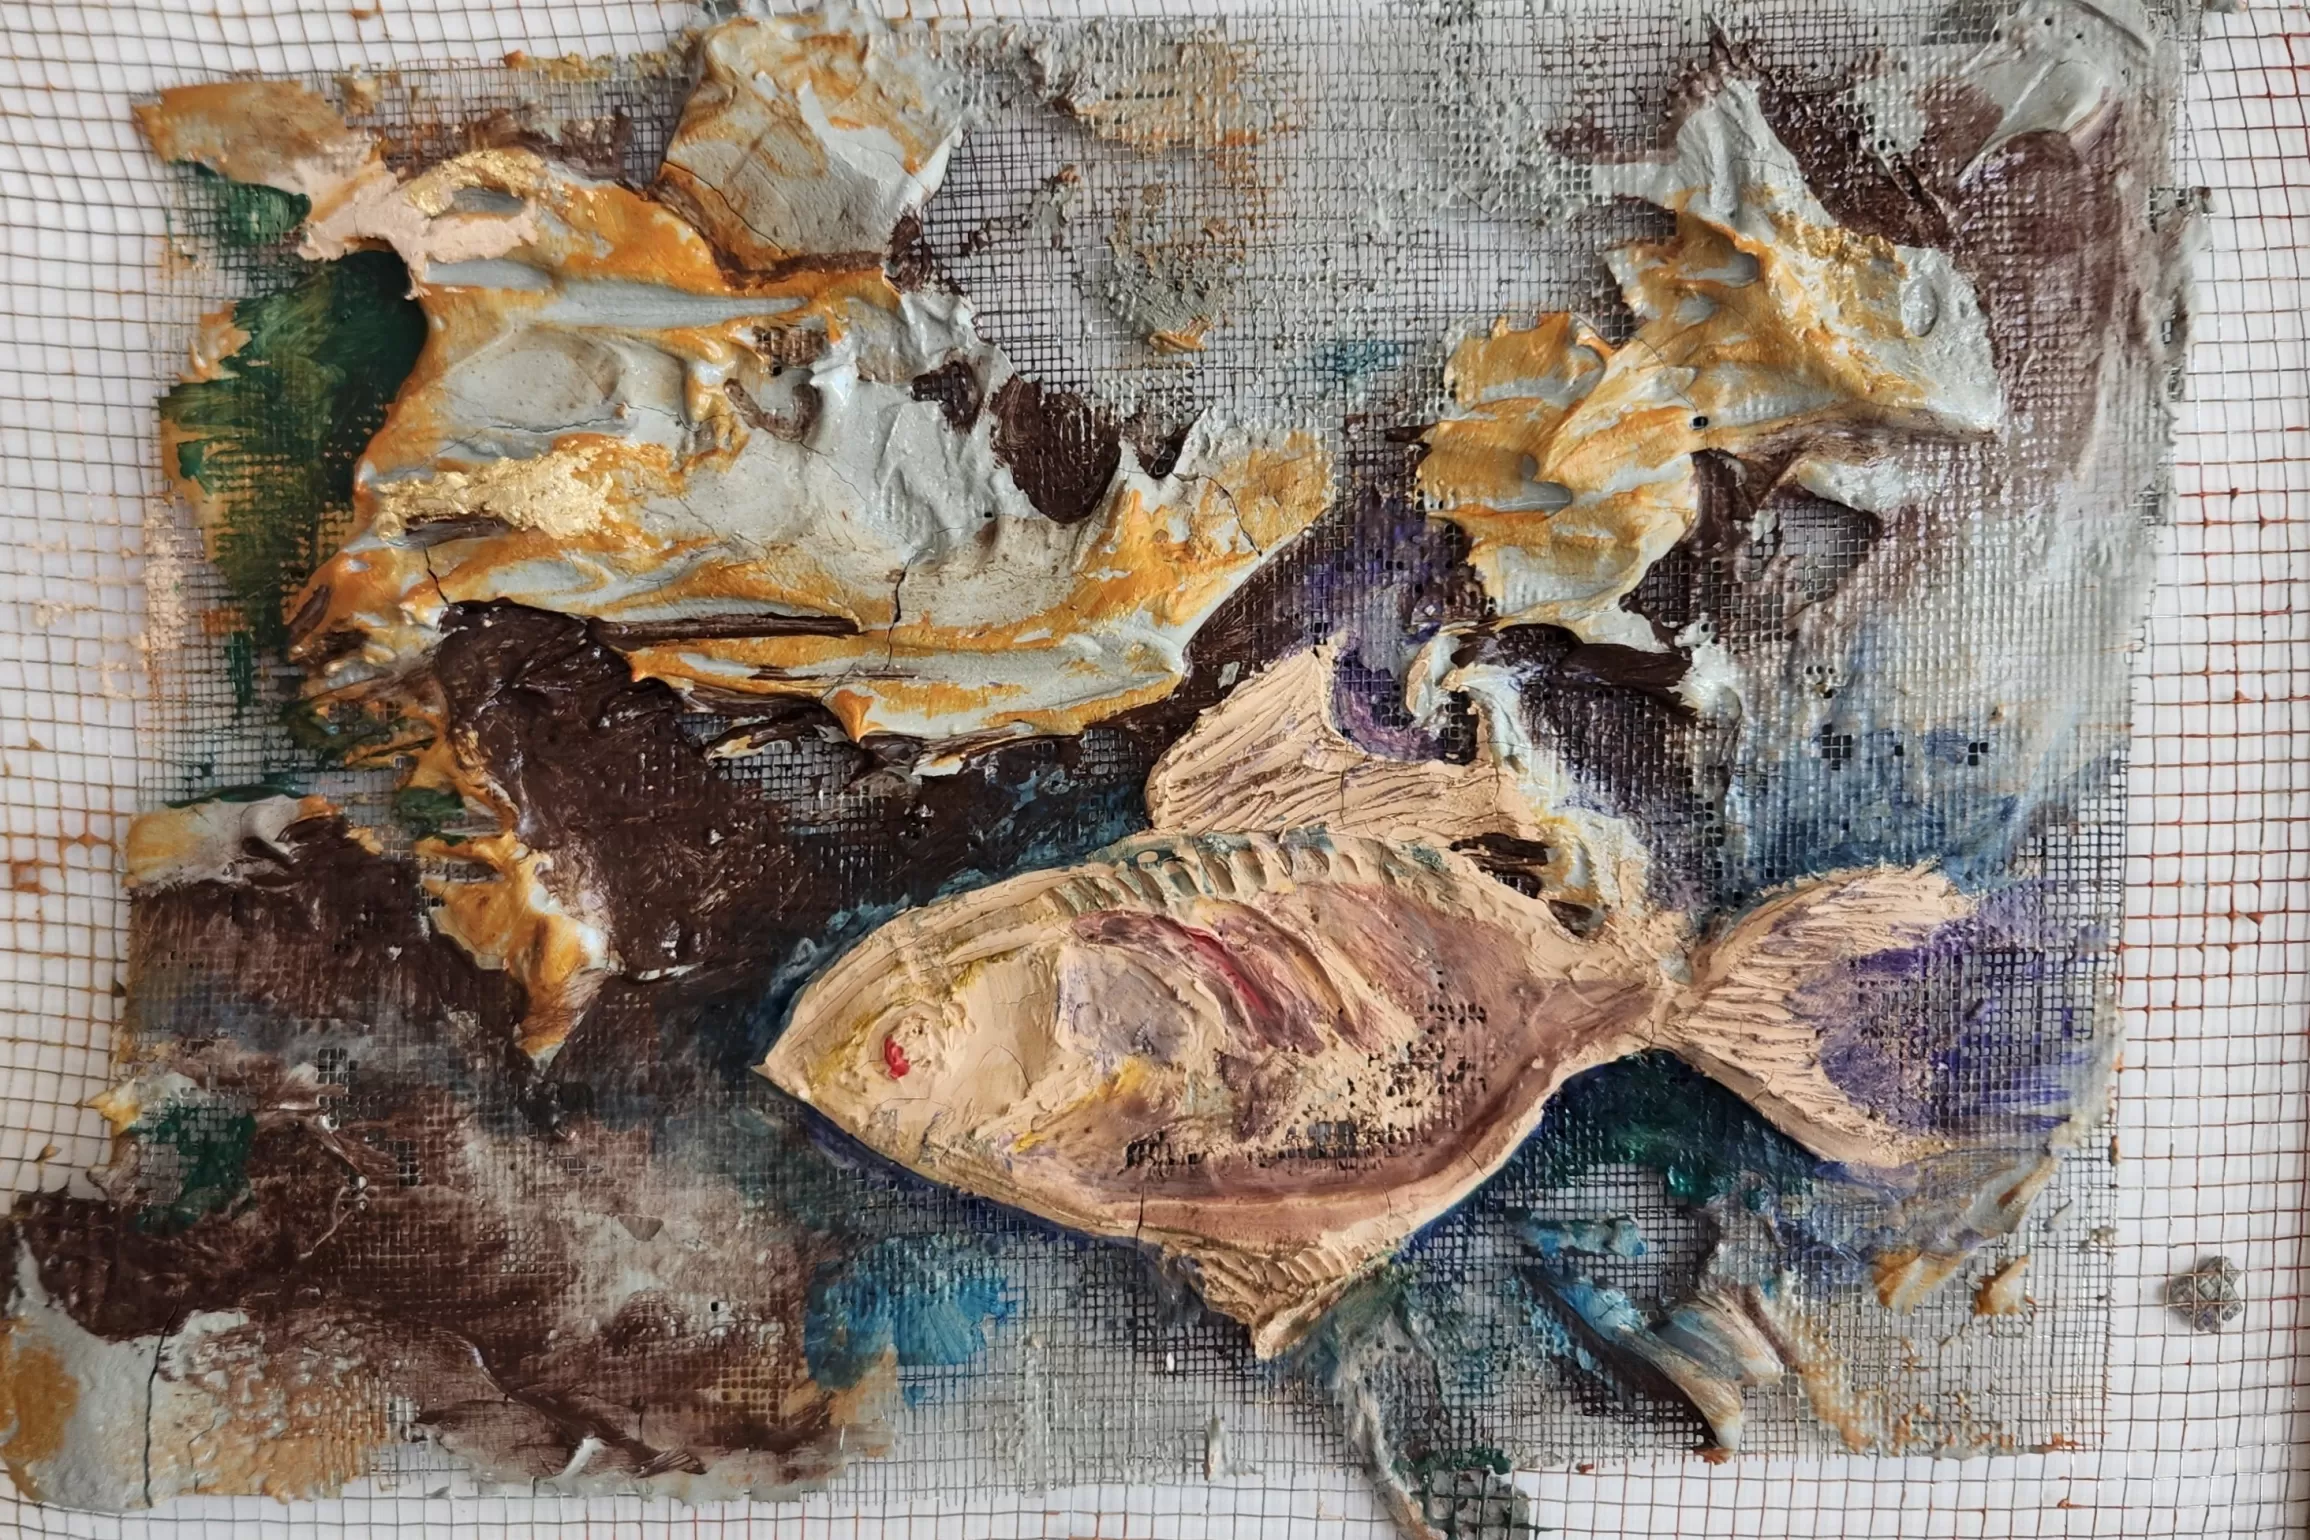 Rana Batrawi, Fruit of the Sea. Mixed materials on mesh, 42 x 31 cm.  The Palestinian Museum Permanent Collection, on permanent loan from Barjeel Art Foundation